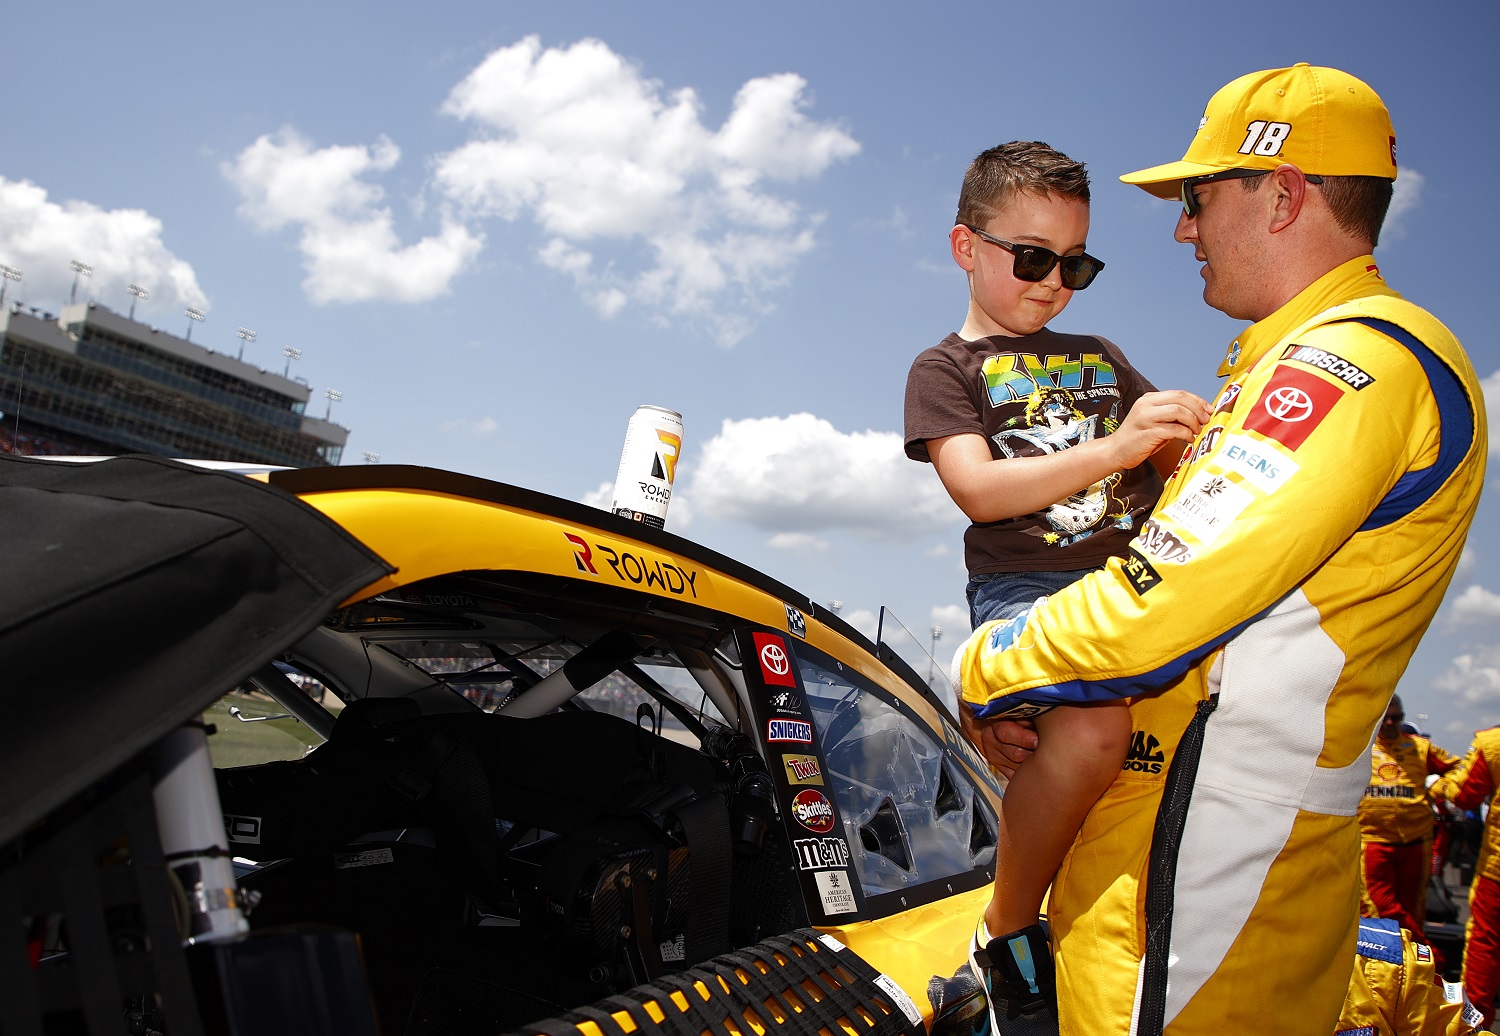 Kyle Busch, driver of the No. 18 Toyota, spends time with his son Brexton on the grid prior to the NASCAR Cup Series Ally 400 at Nashville Superspeedway on June 20, 2021.